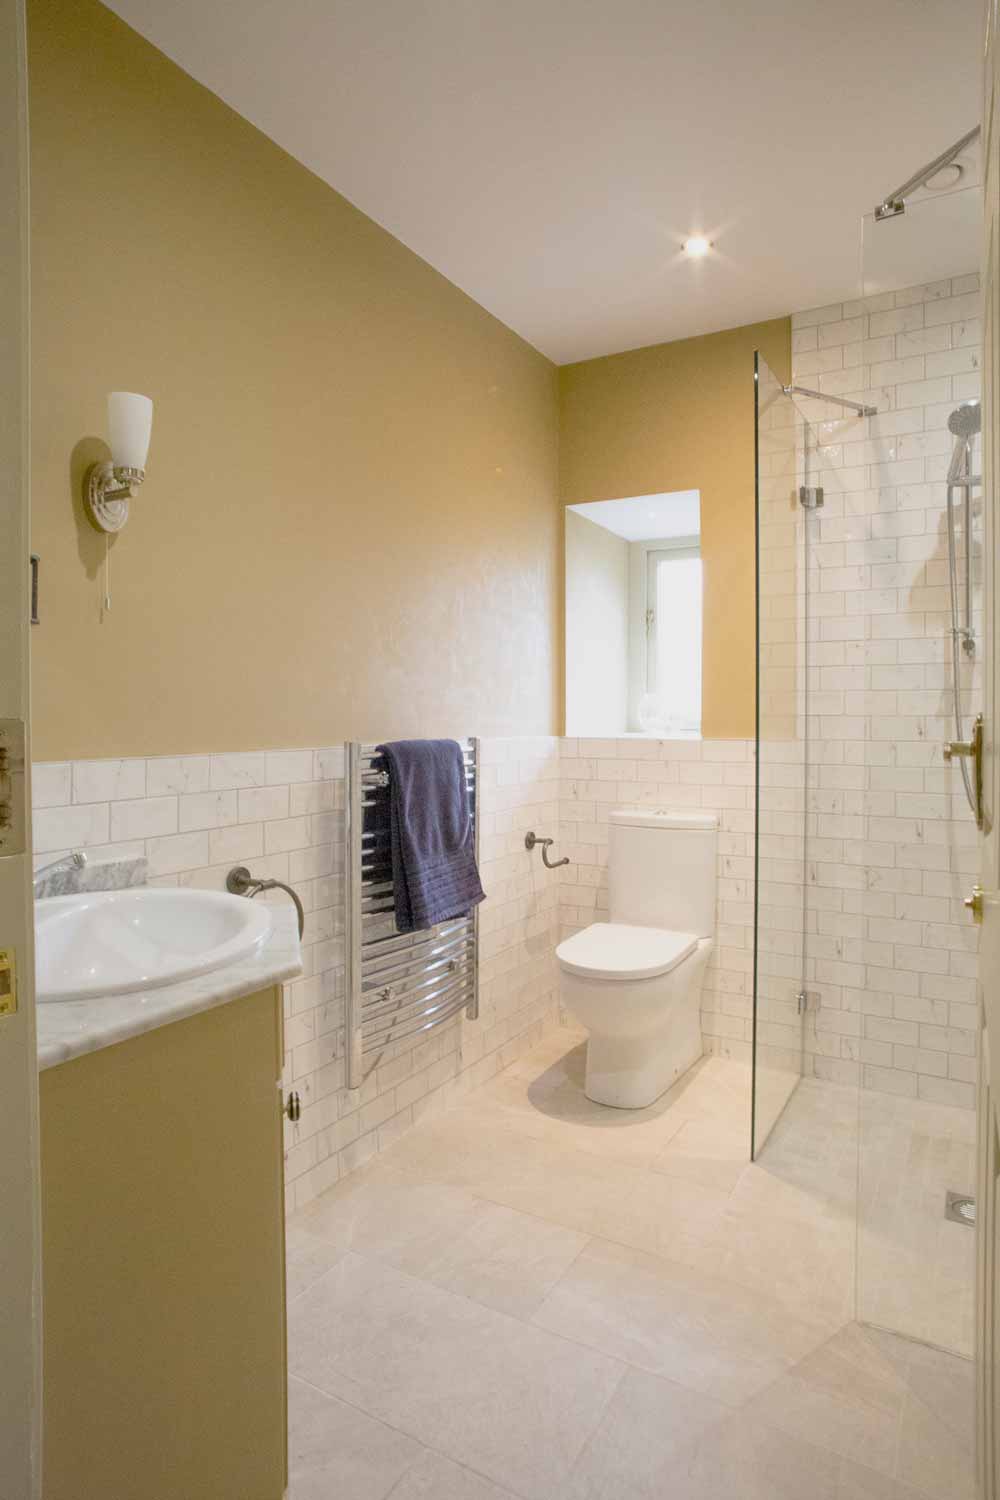 Luxury Self Catering Bathroom at The Old Stables Moyglare